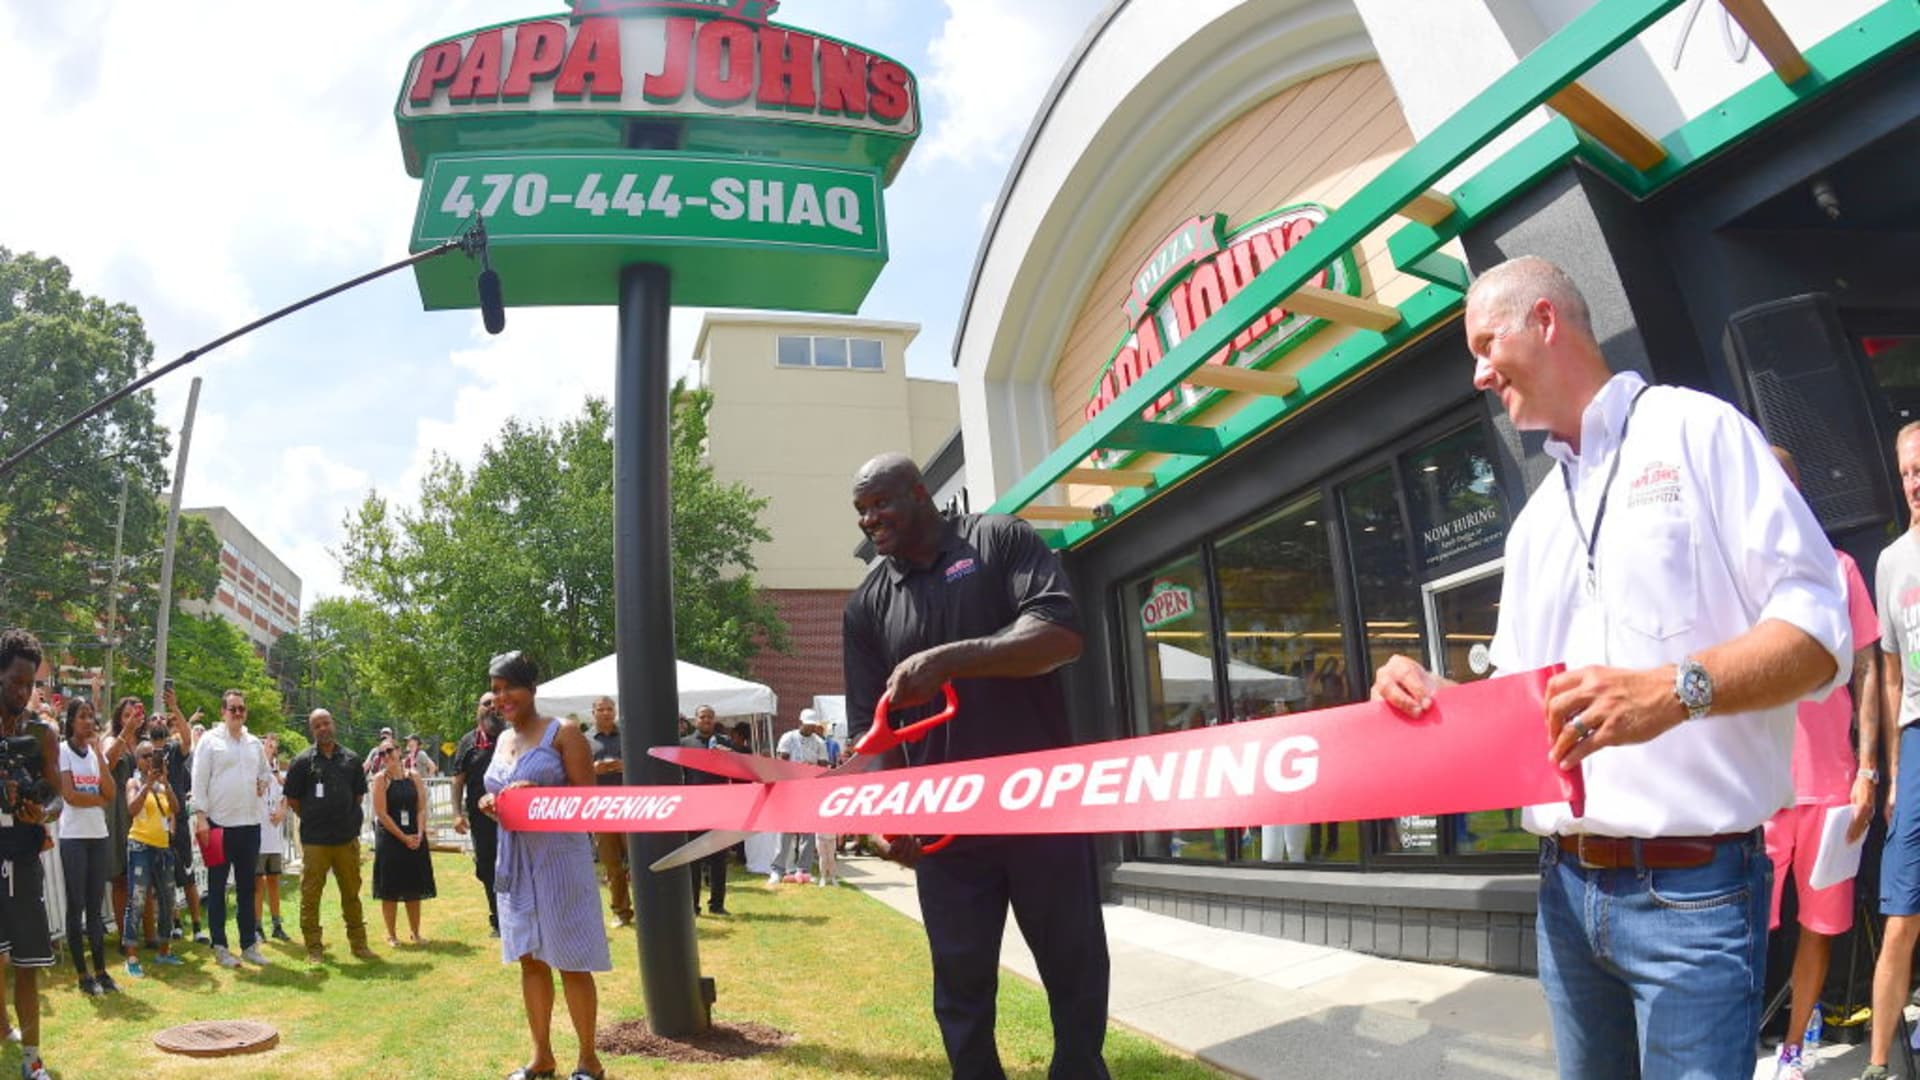 Keisha Lance Bottoms, Steve Ritchie and Shaquille O'Neal attend Shaq's Papa John's Pizza Grand Opening on August 24, 2019 in Atlanta, Georgia.